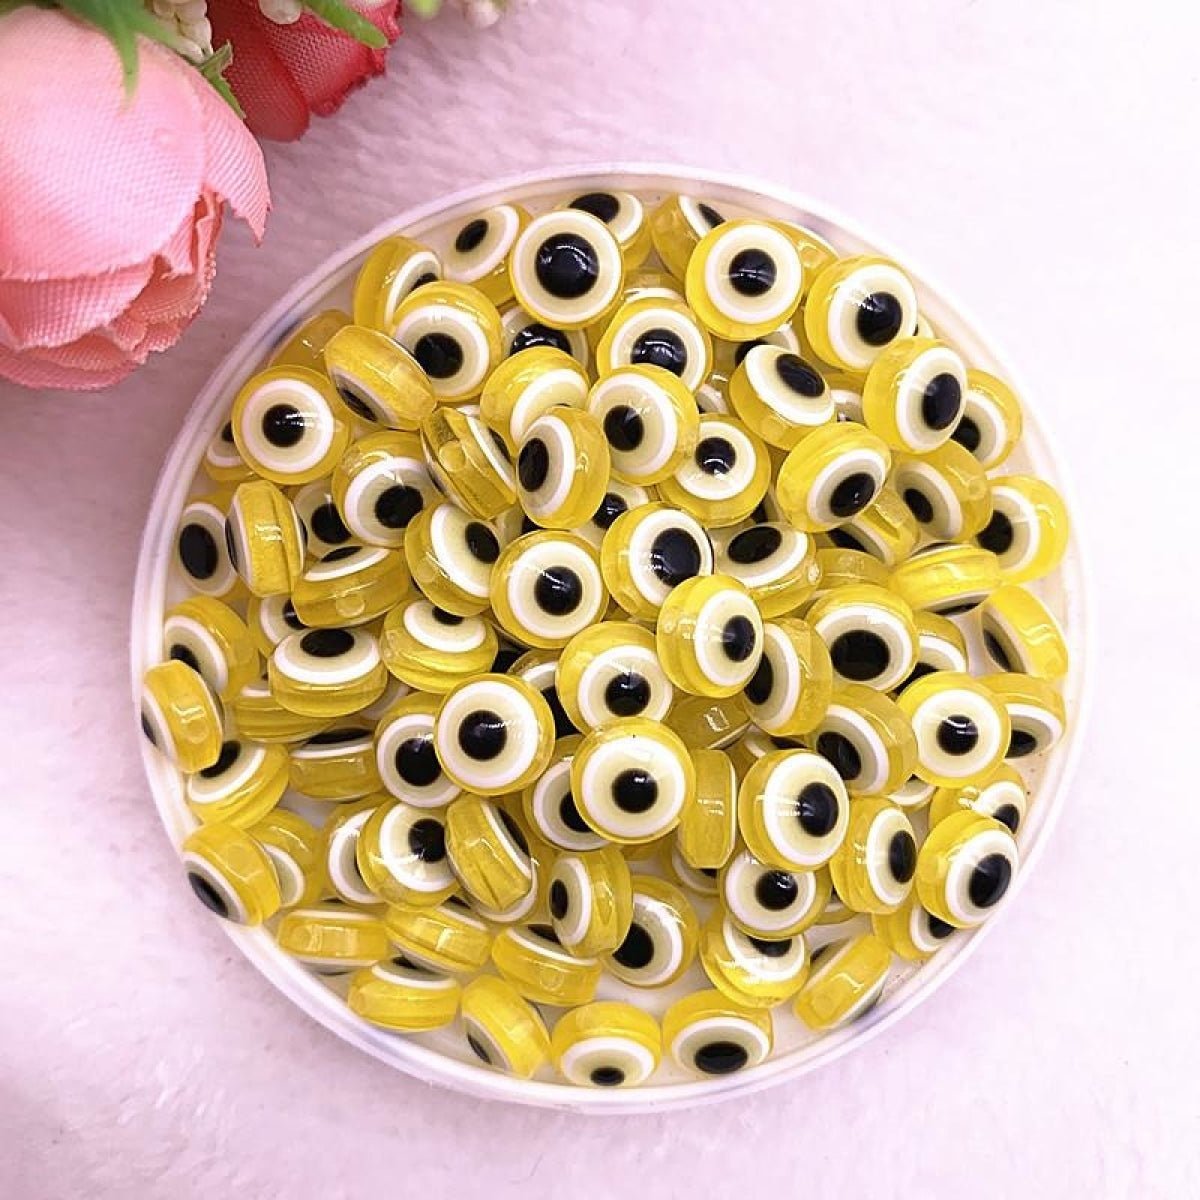 48pcs 8/10mm Oval Resin Spacer Beads Double Sided Eyes for Jewellery Making DIY Bracelet Beads Set B - Yellow 8mm - Asia Sell